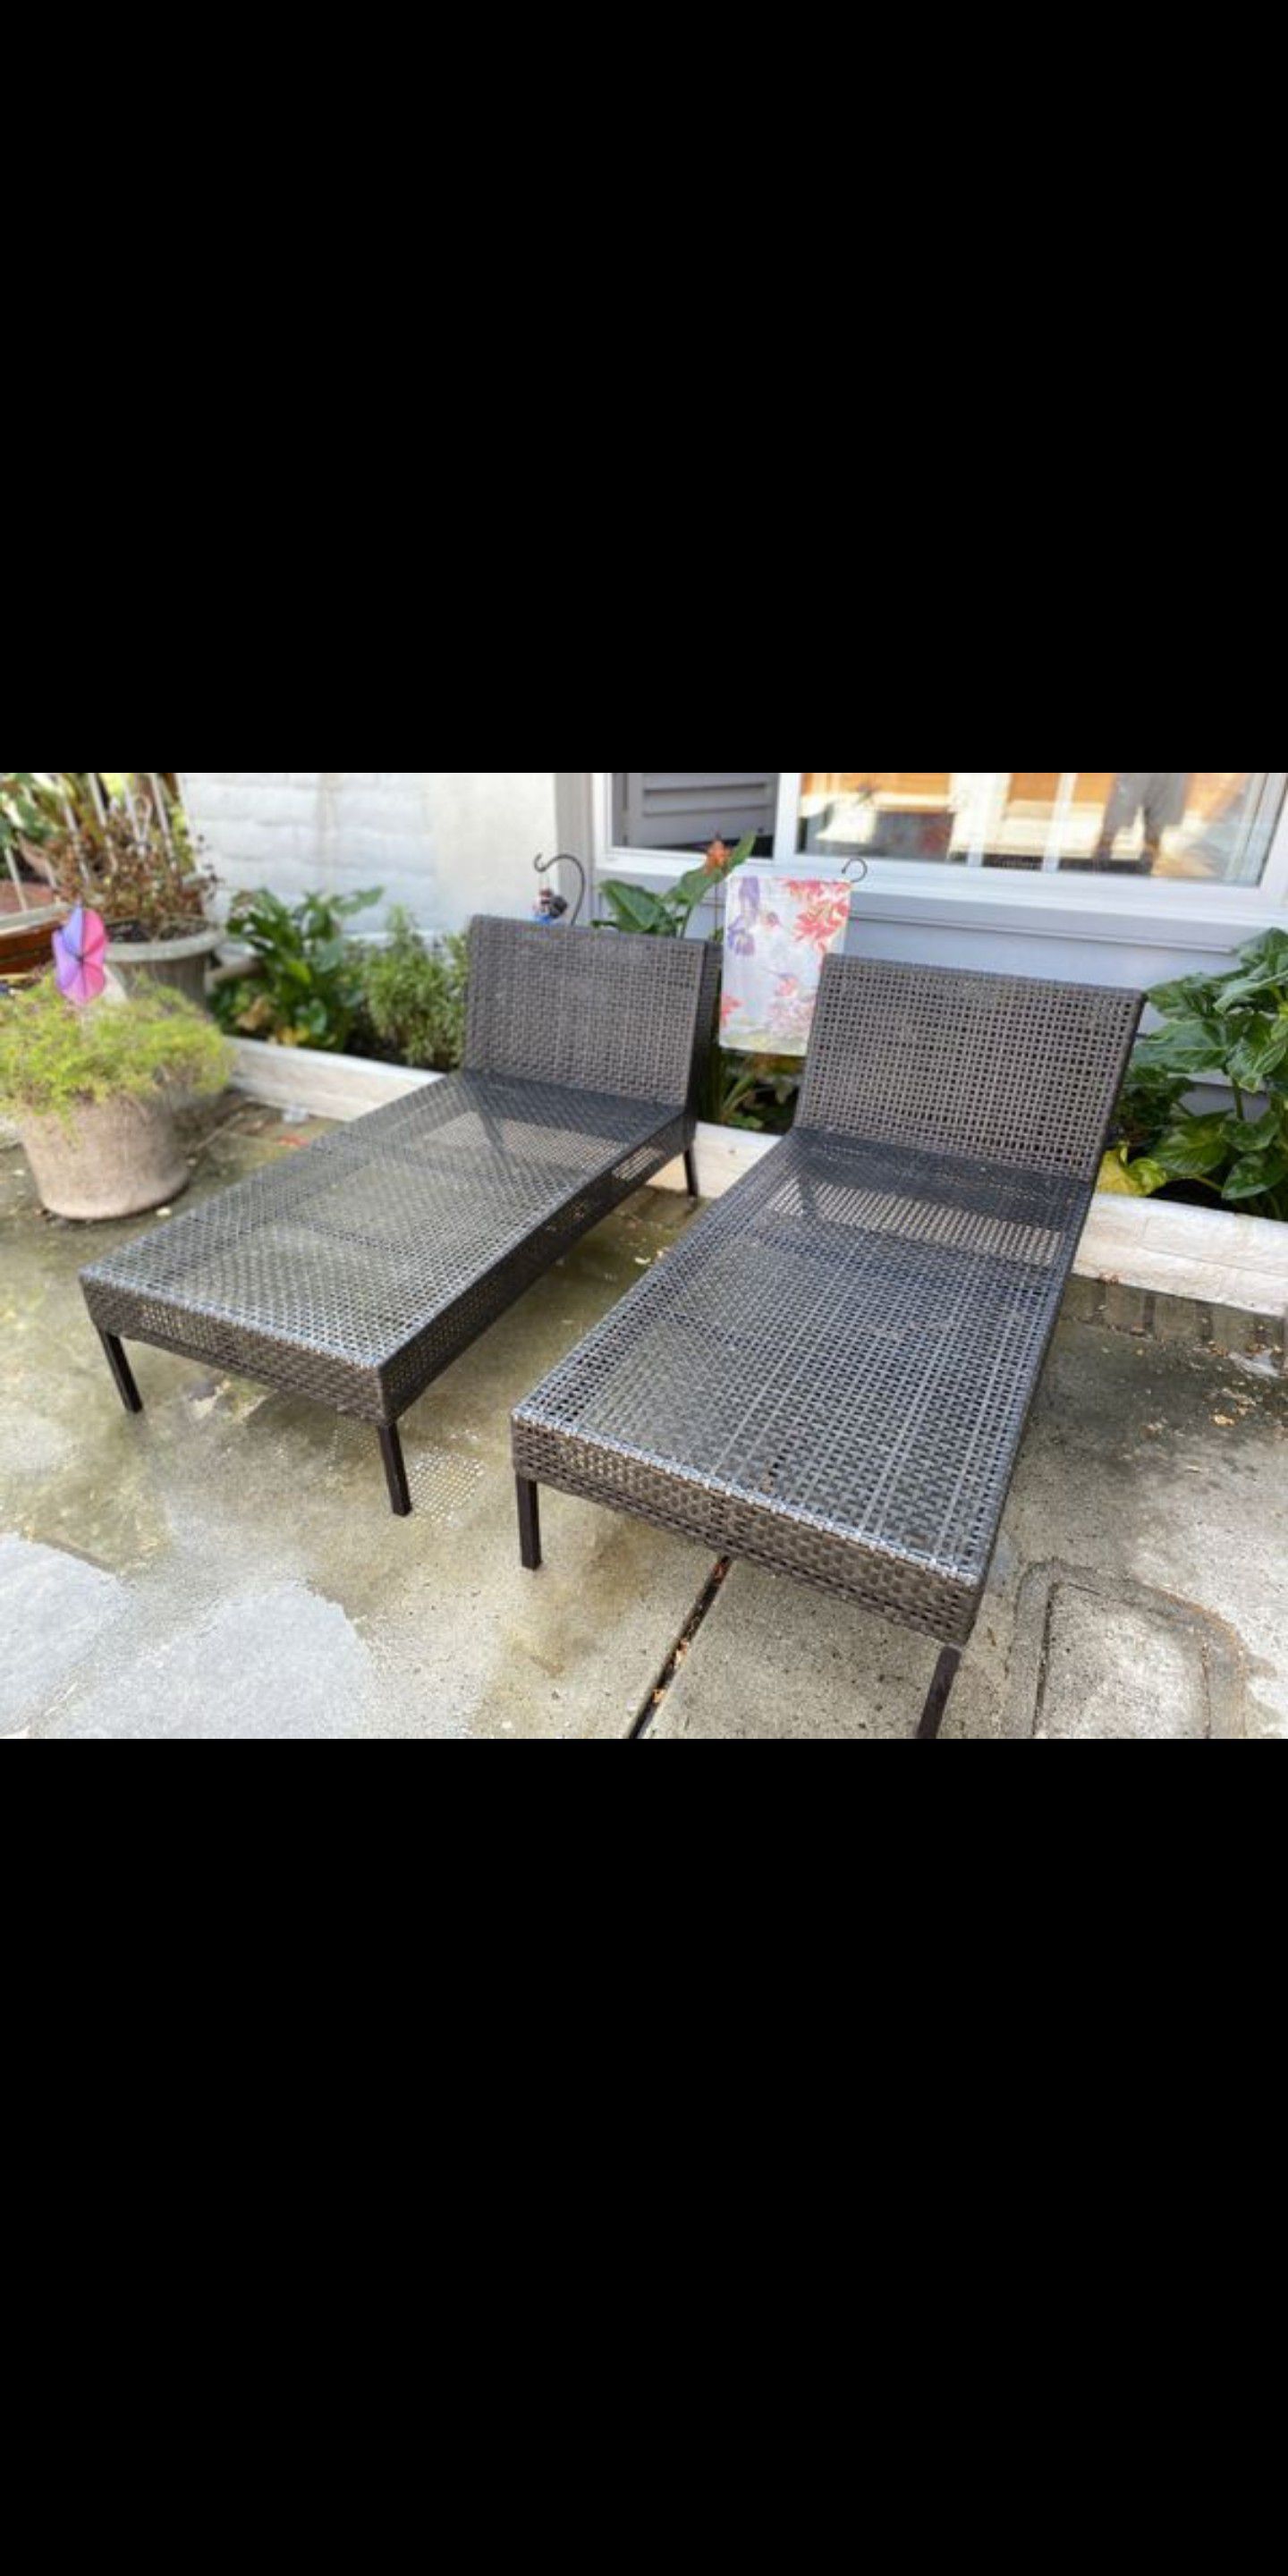 Two wicker Long chirs, and two regular chairs for patio or pool